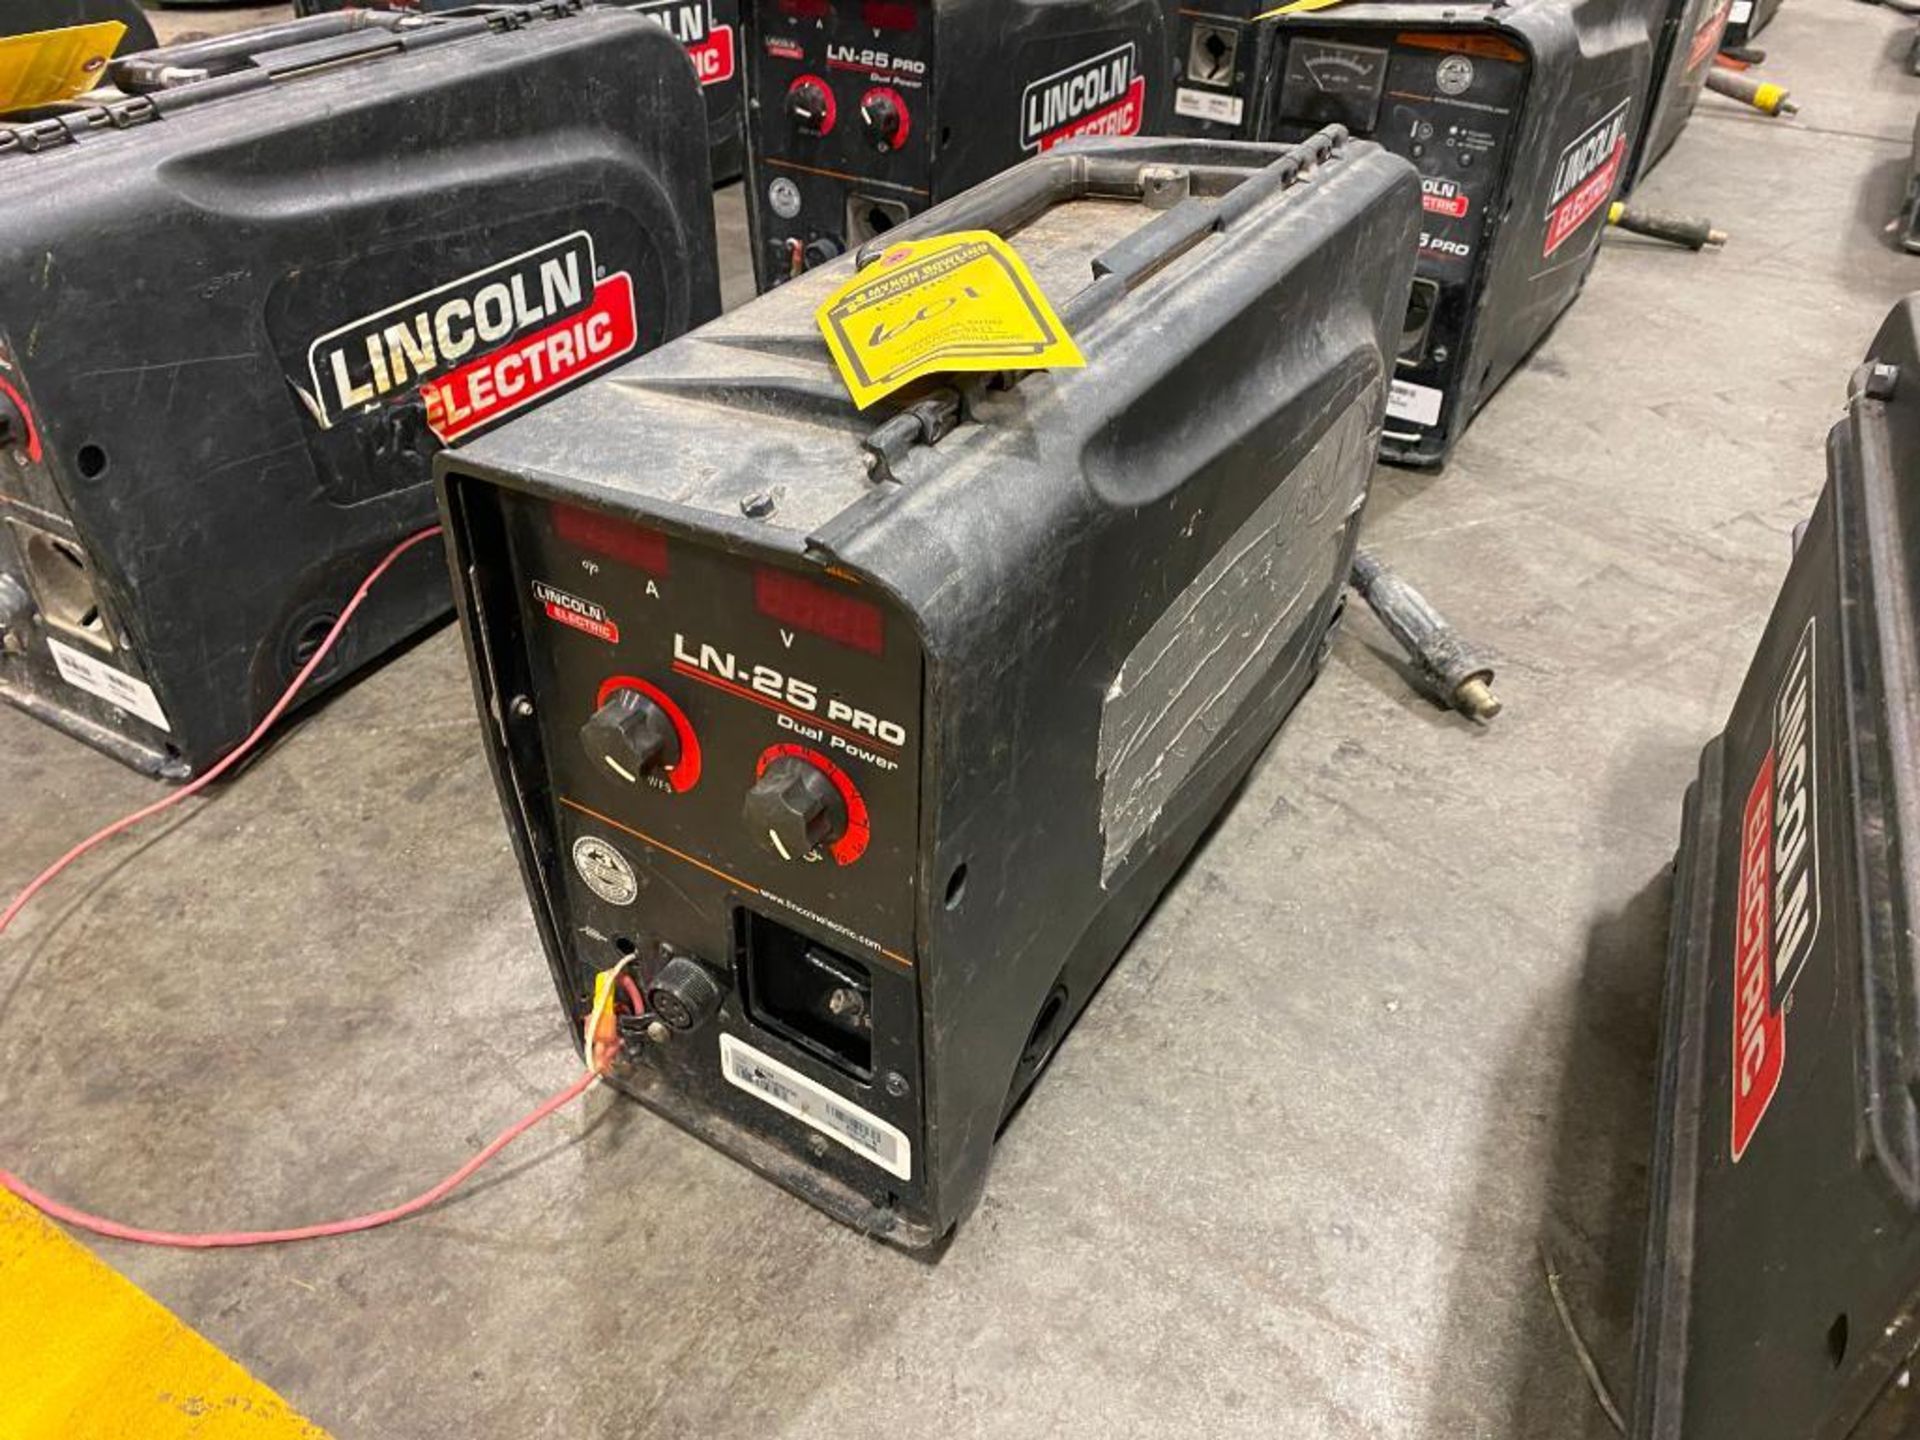 Lincoln LN-25 Pro Dual Power Wire Feeder Suitcase Welder, S/N U1170808750 - Image 2 of 3